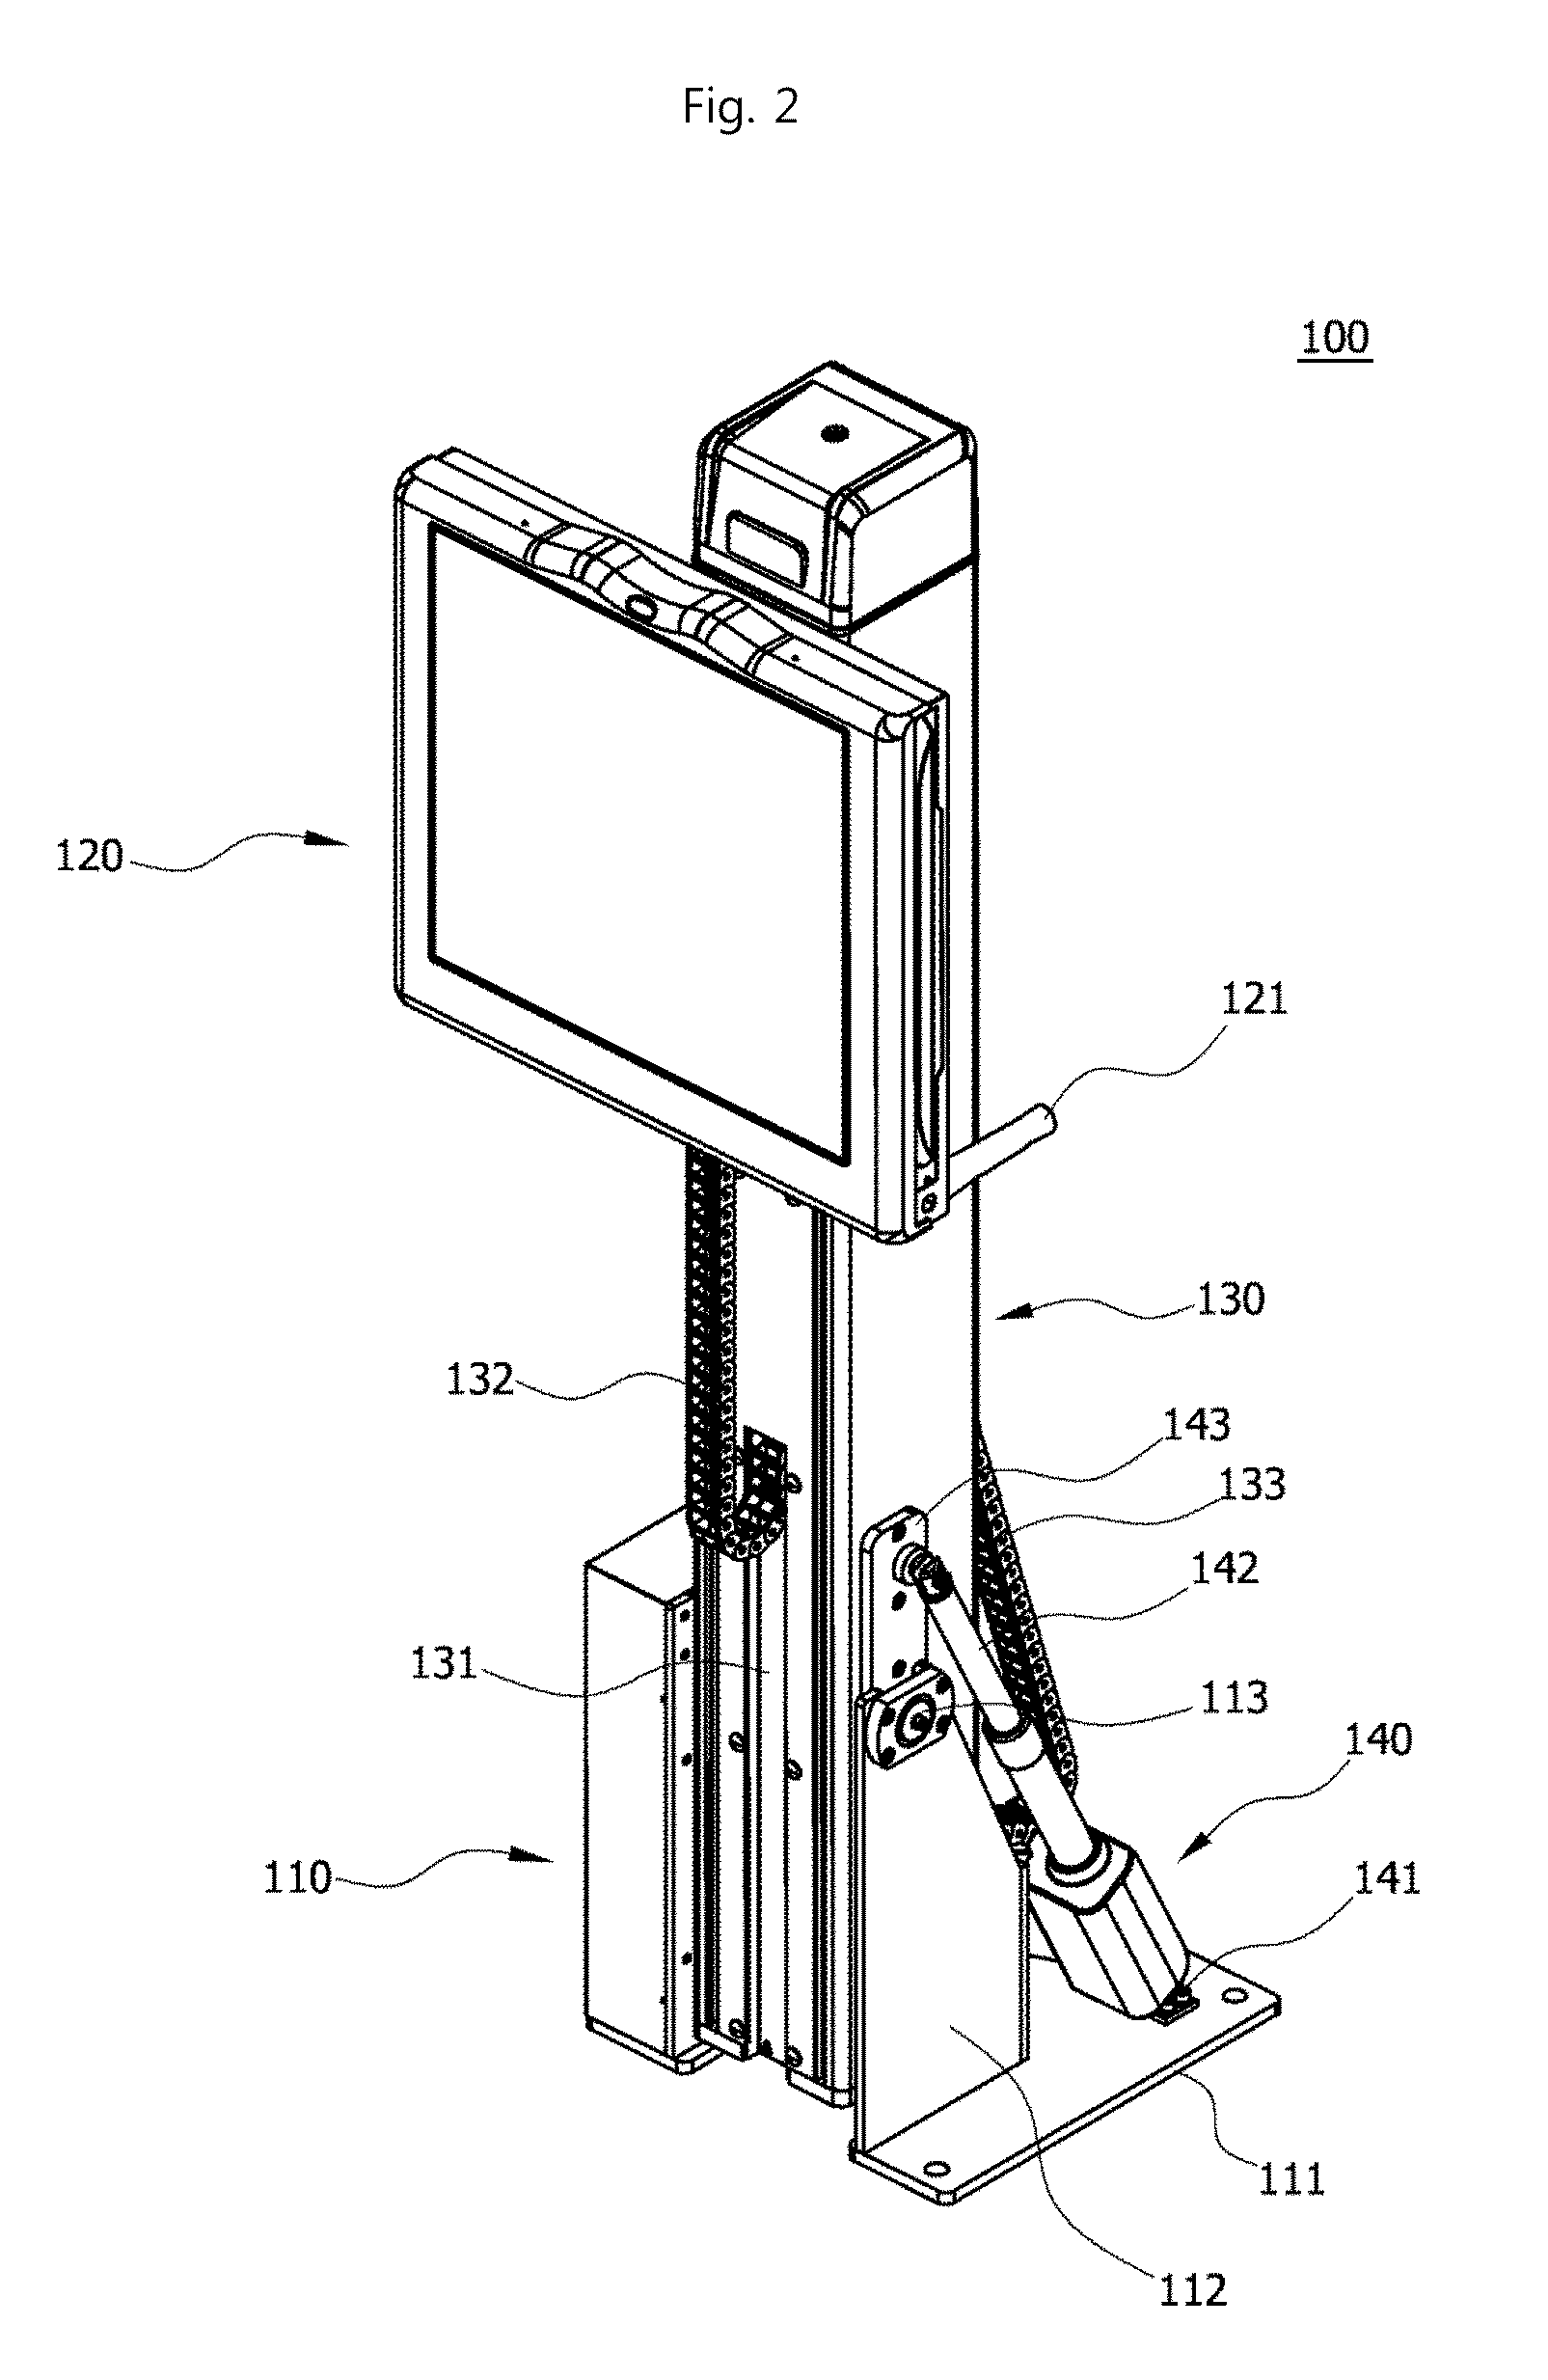 X-ray photography device capable of photographing in various photography modes